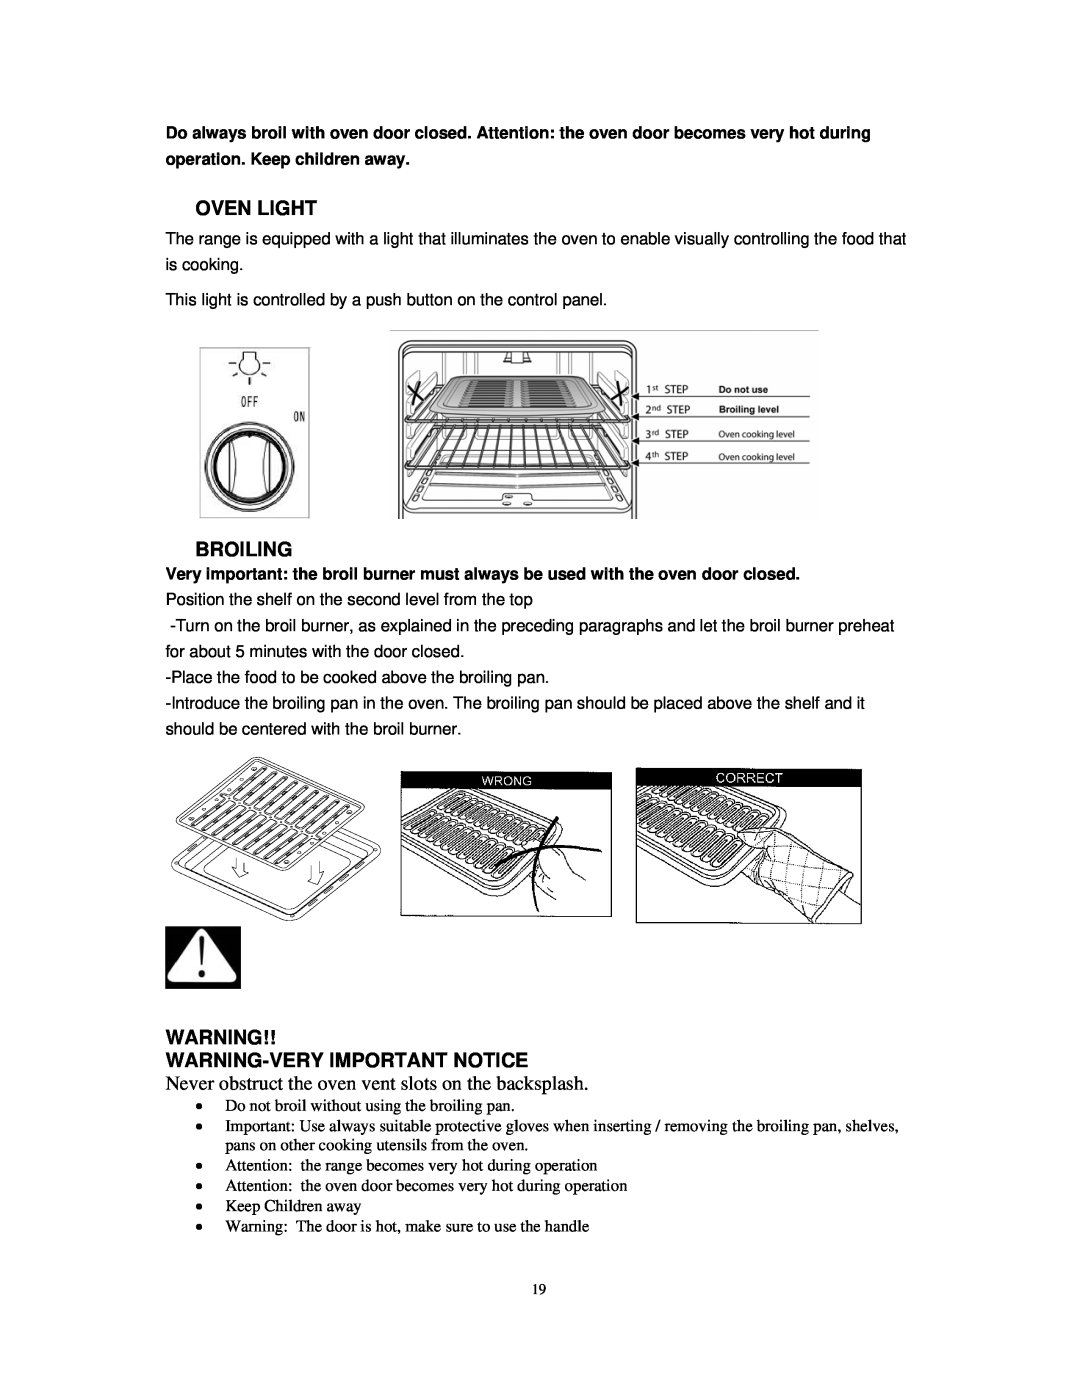 Avanti DG2450SS Oven Light, Broiling, Warning-Very Important Notice, Never obstruct the oven vent slots on the backsplash 